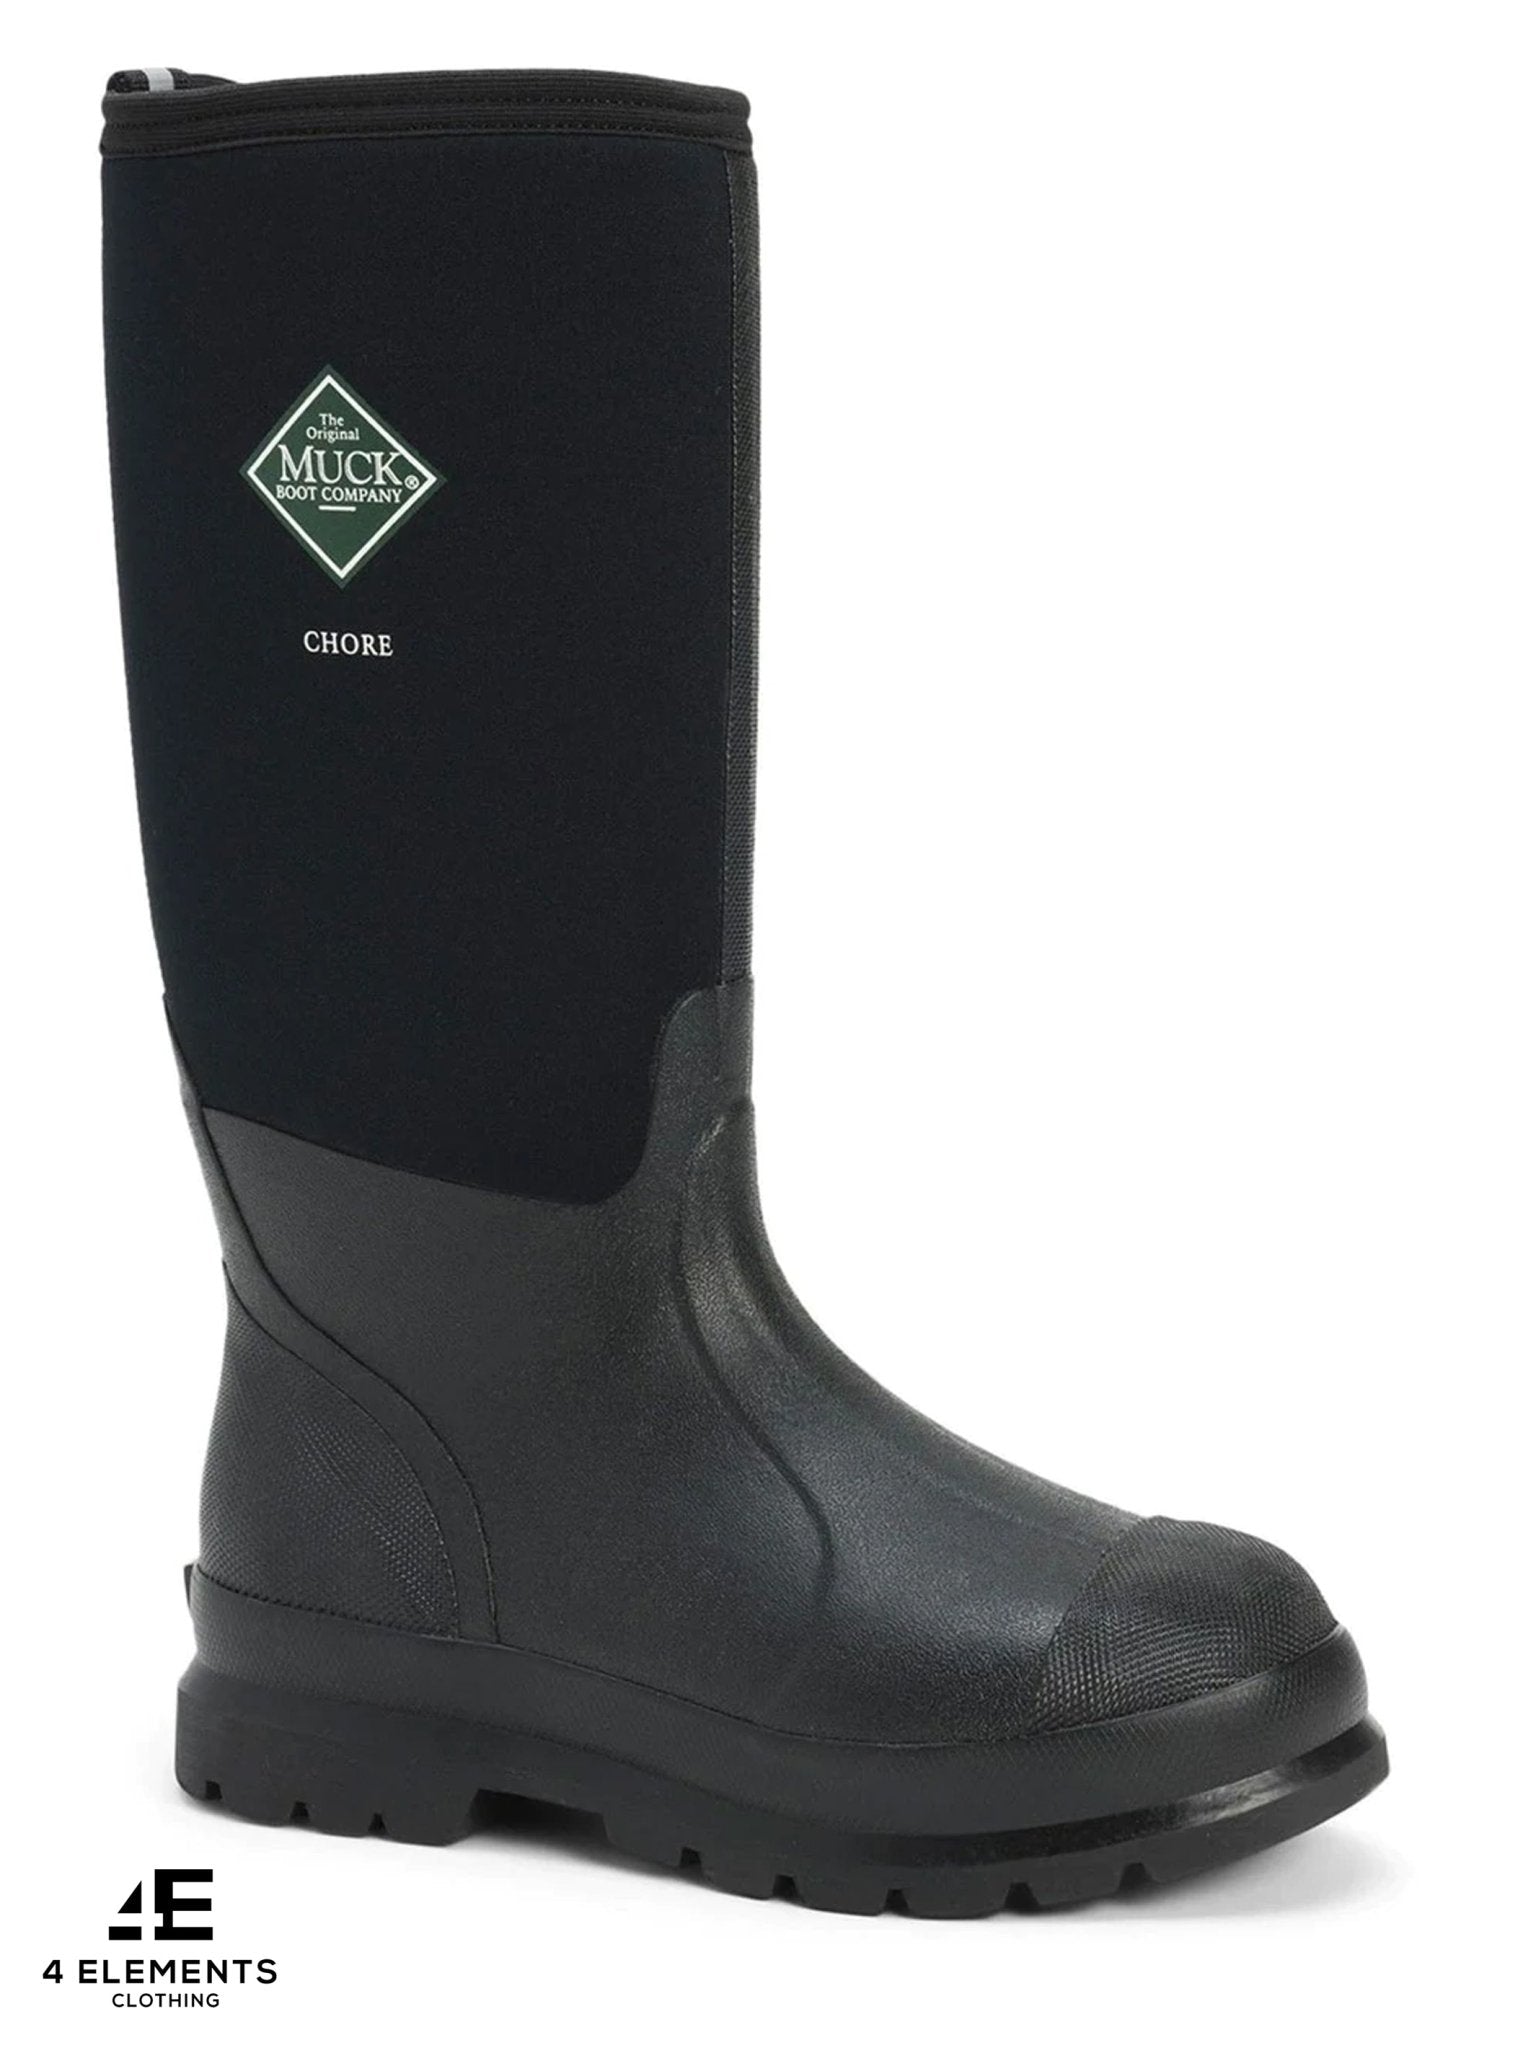 Muck Boots Muck Boots - Chore Classic Waterproof mens and ladies tall boots. Boots